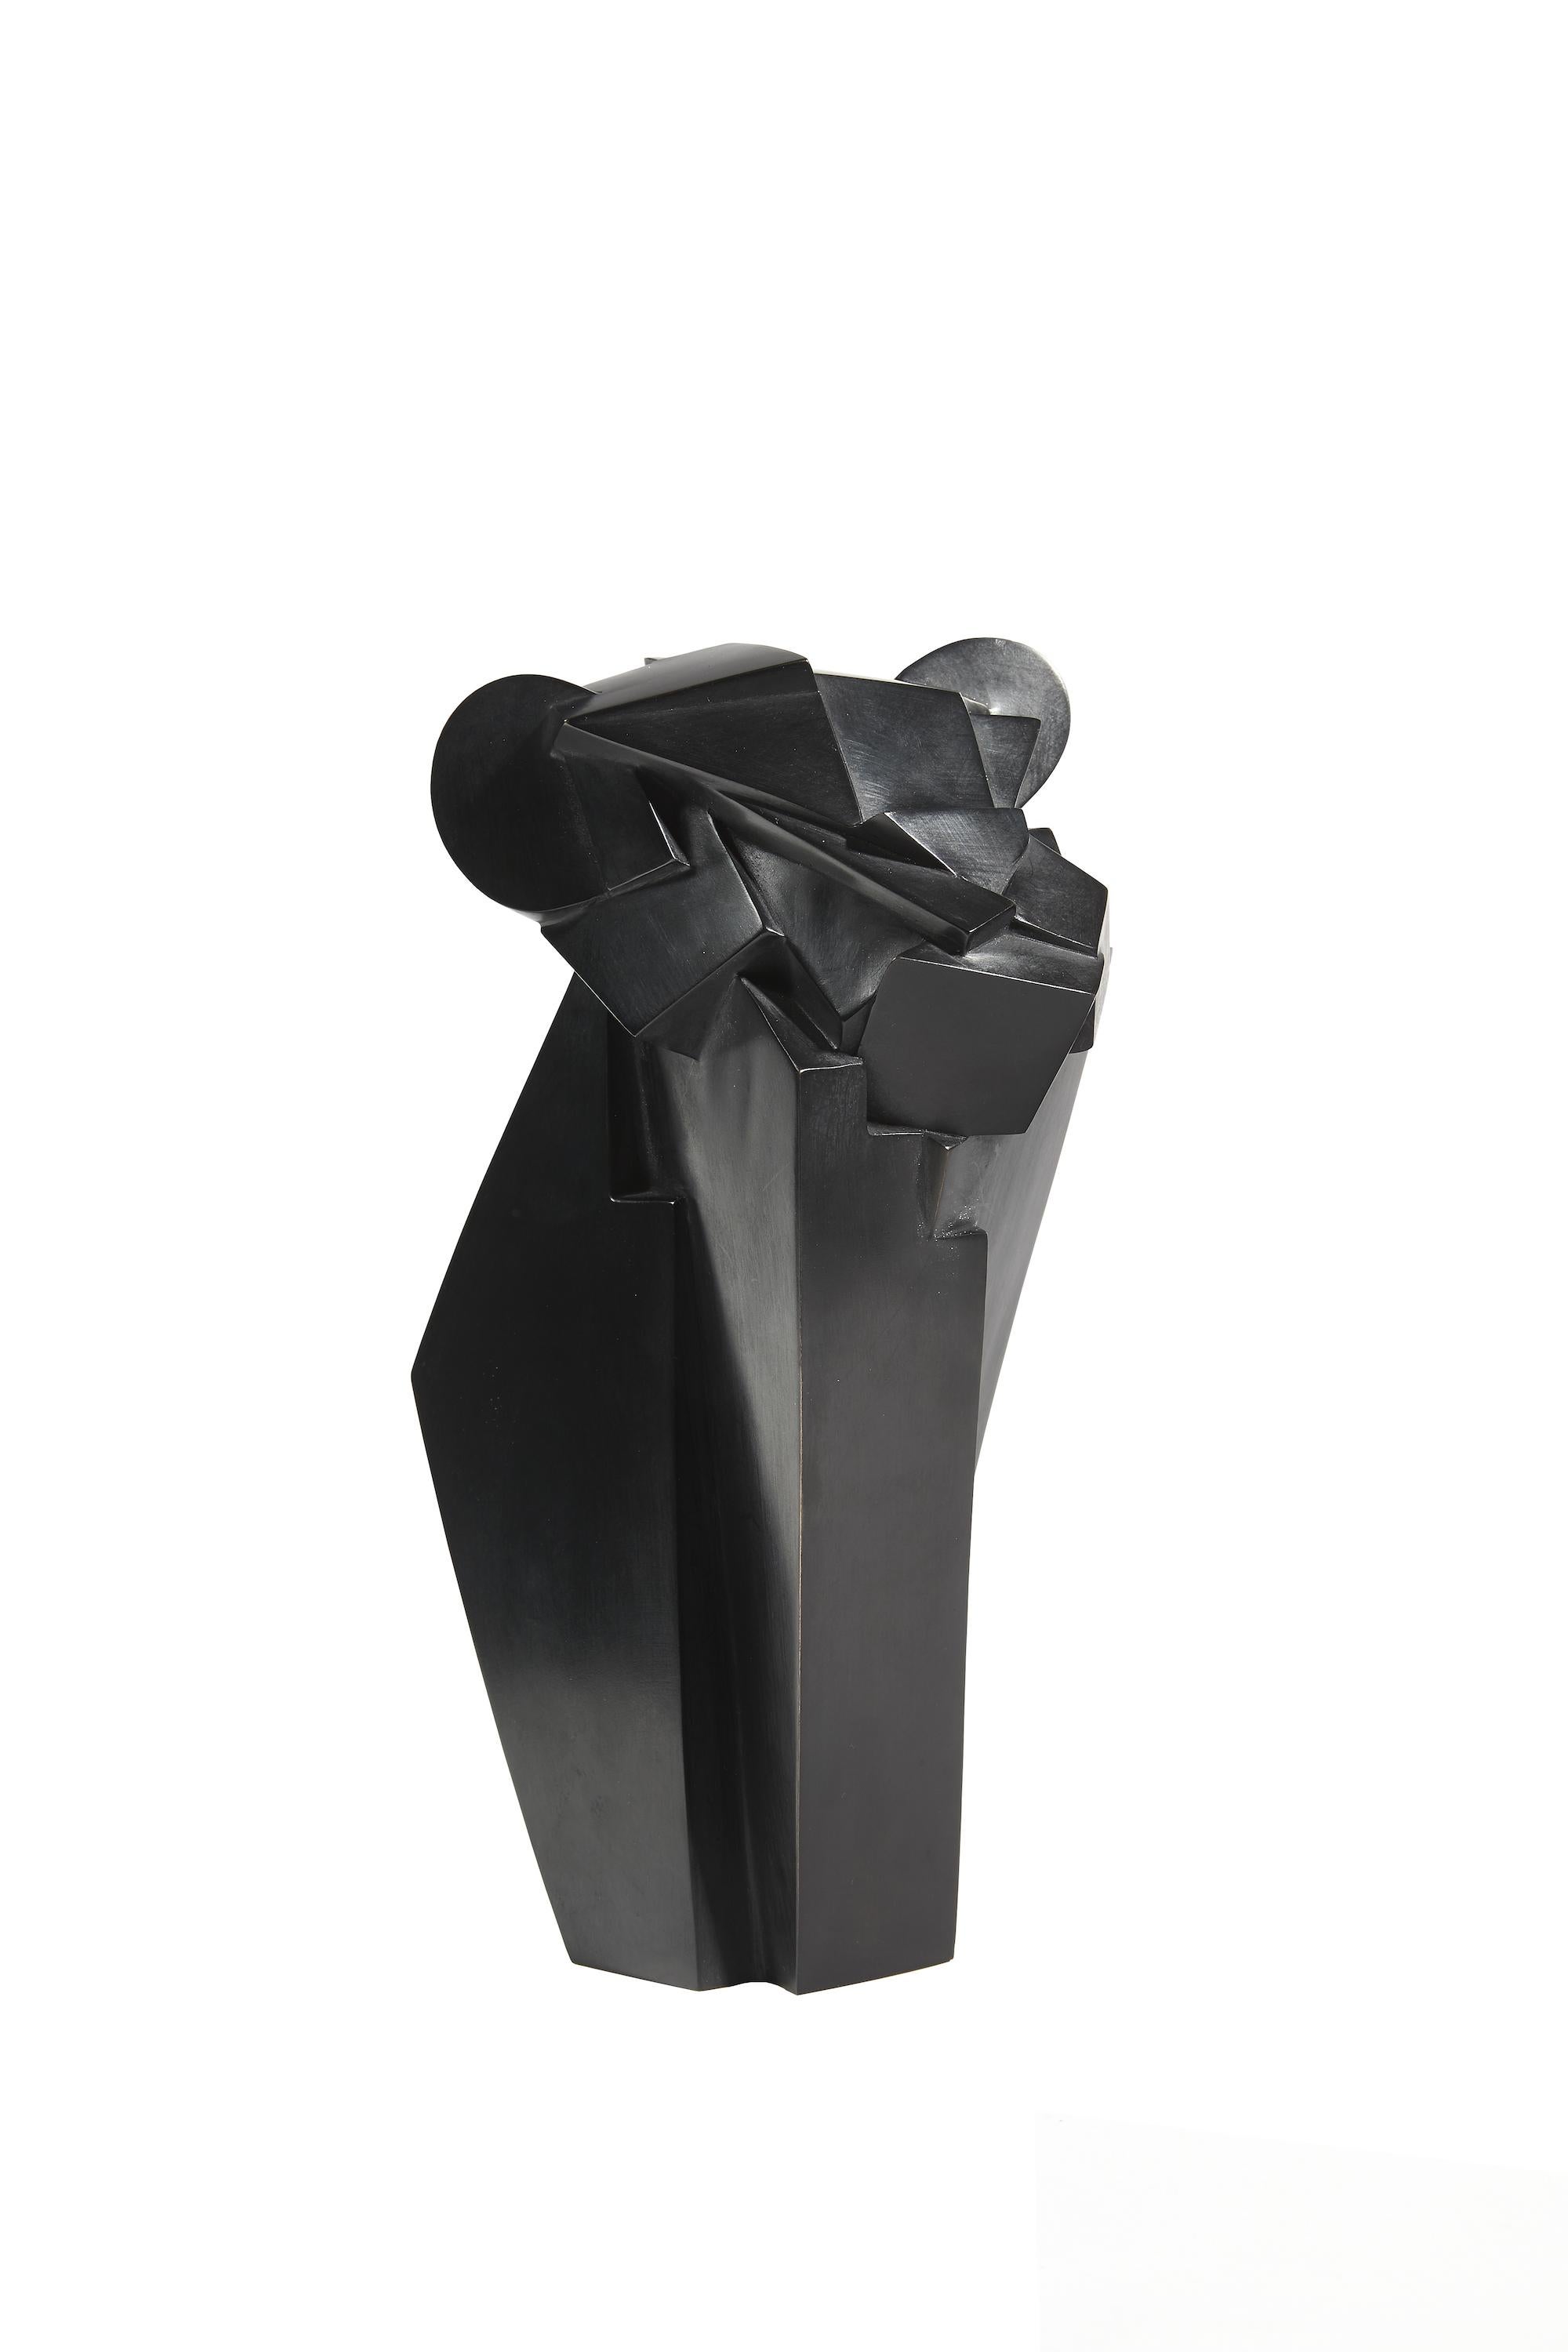 Kiomba is a bronze sculpture by contemporary artist Jacques Owczarek, dimensions are 29.5 × 16 × 15 cm (11.6 × 6.3 × 5.9 in). The sculpture is signed and numbered, it is part of a limited edition of 8 editions + 4 artist’s proofs, and comes with a